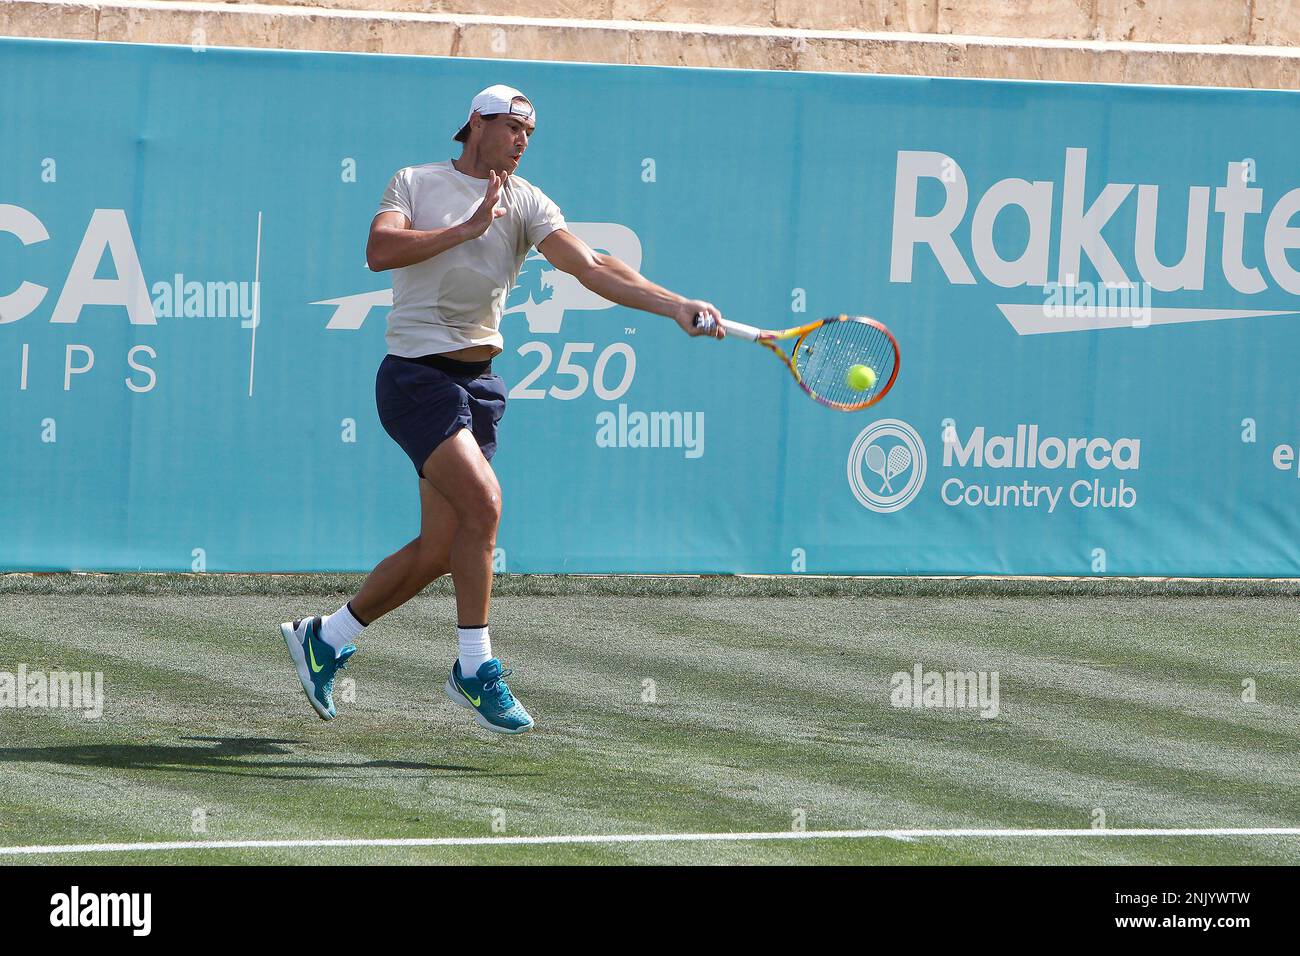 The tennis player Rafael Nadal during a training session open to the press, at the Mallorca Country Club, on June 17, 20222, in Santa Ponça, Mallorca, Balearic Islands (Spain)